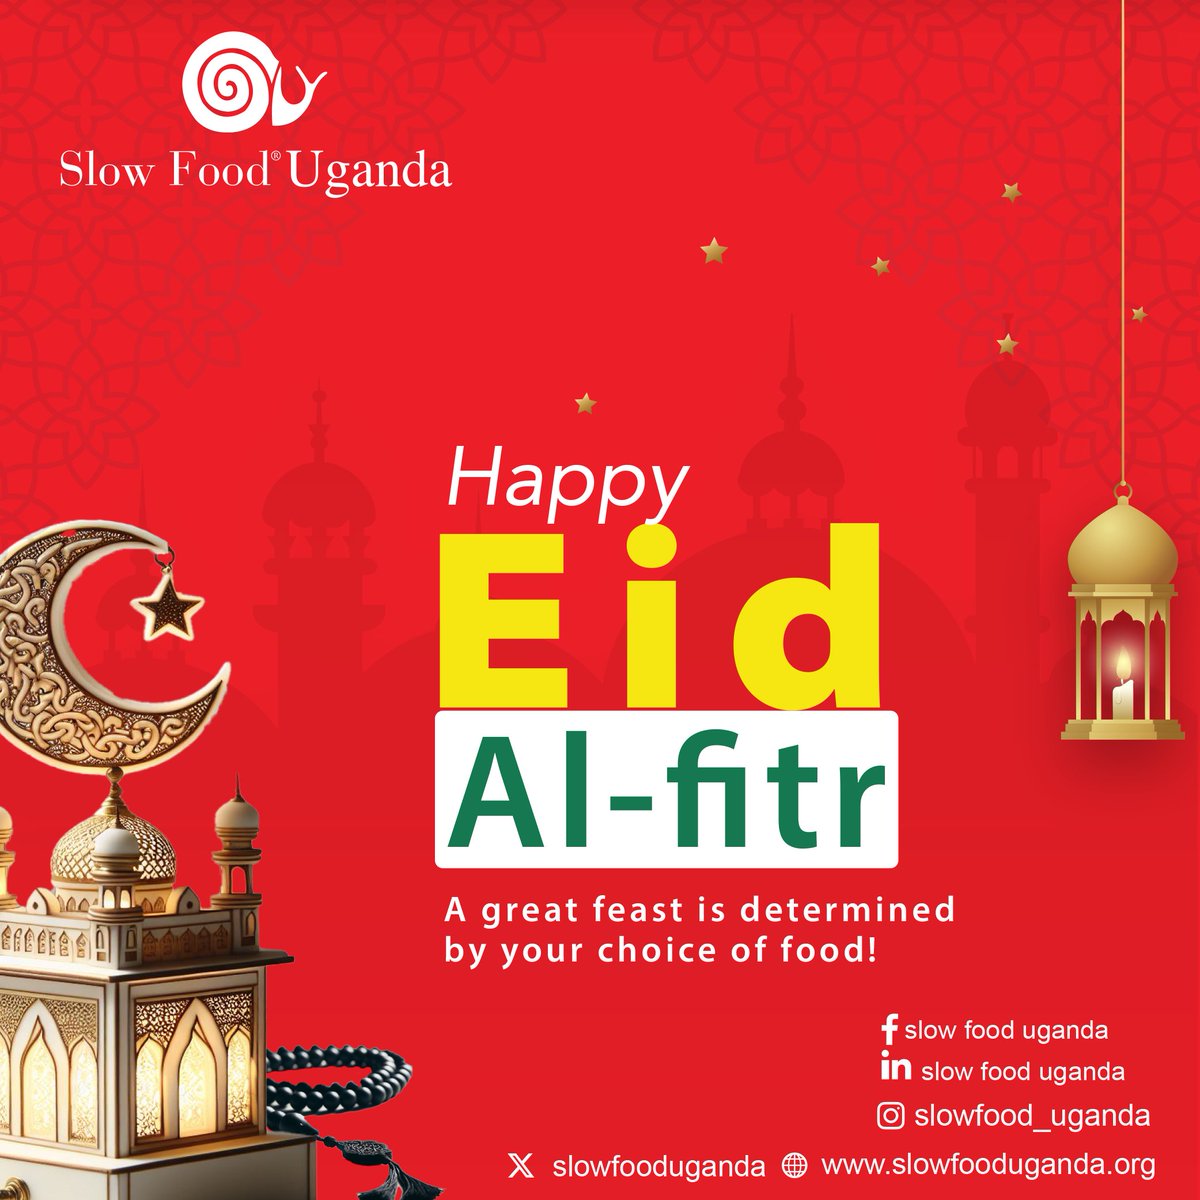 Eid Mubarak to all good food lovers! May this special day bring you joy, happiness, and lots of delicious, eco-friendly food. Have a wonderful Eid celebration!